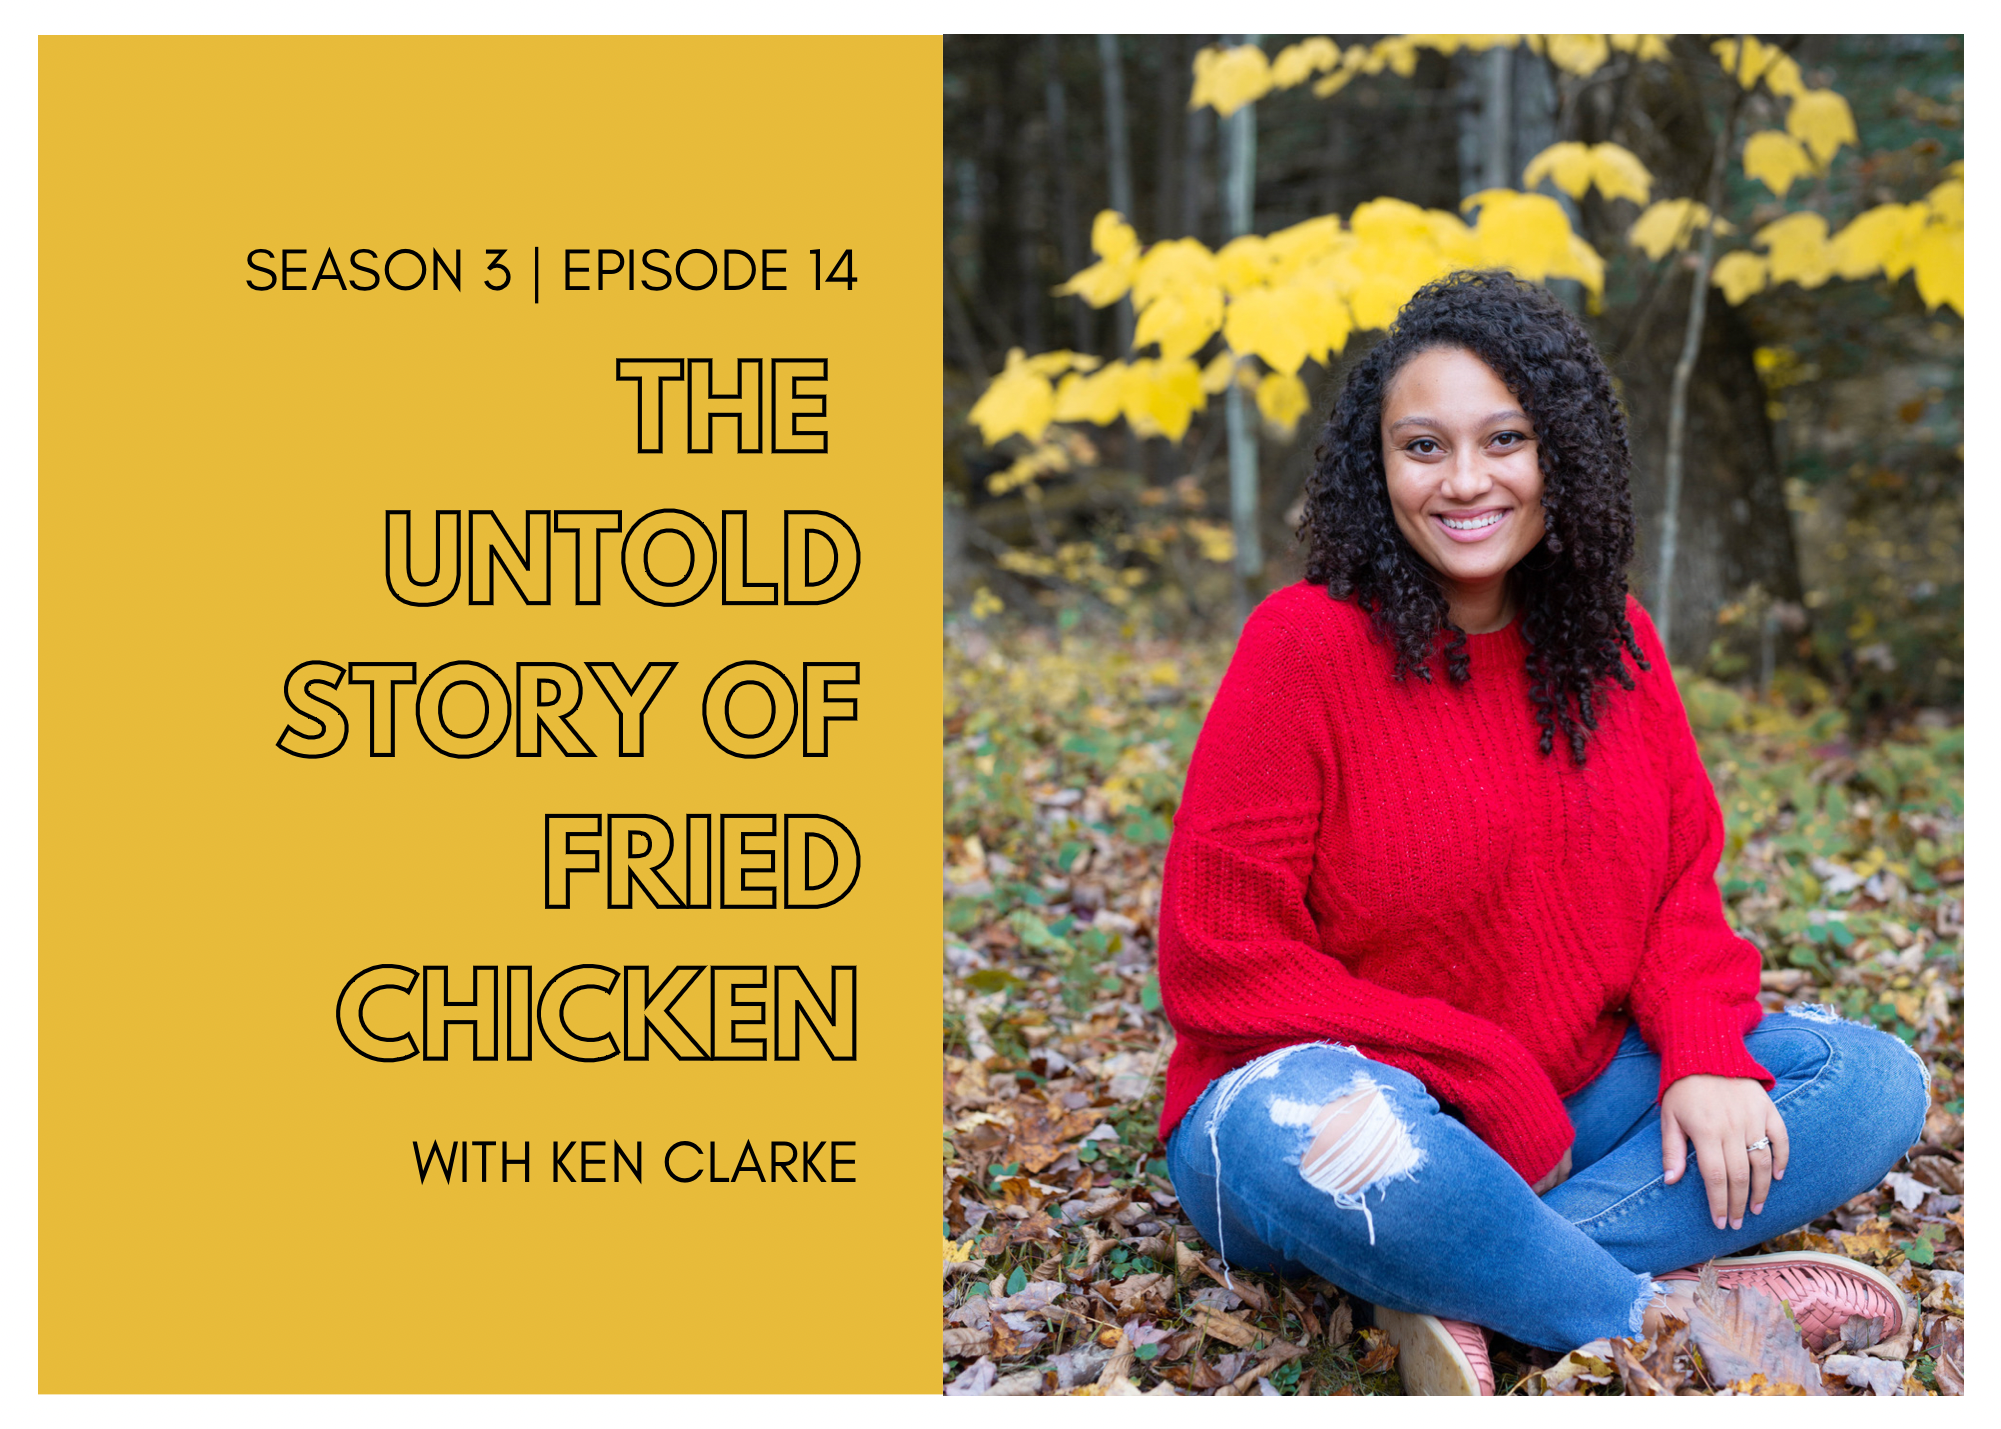 The Untold Story of Fried Chicken